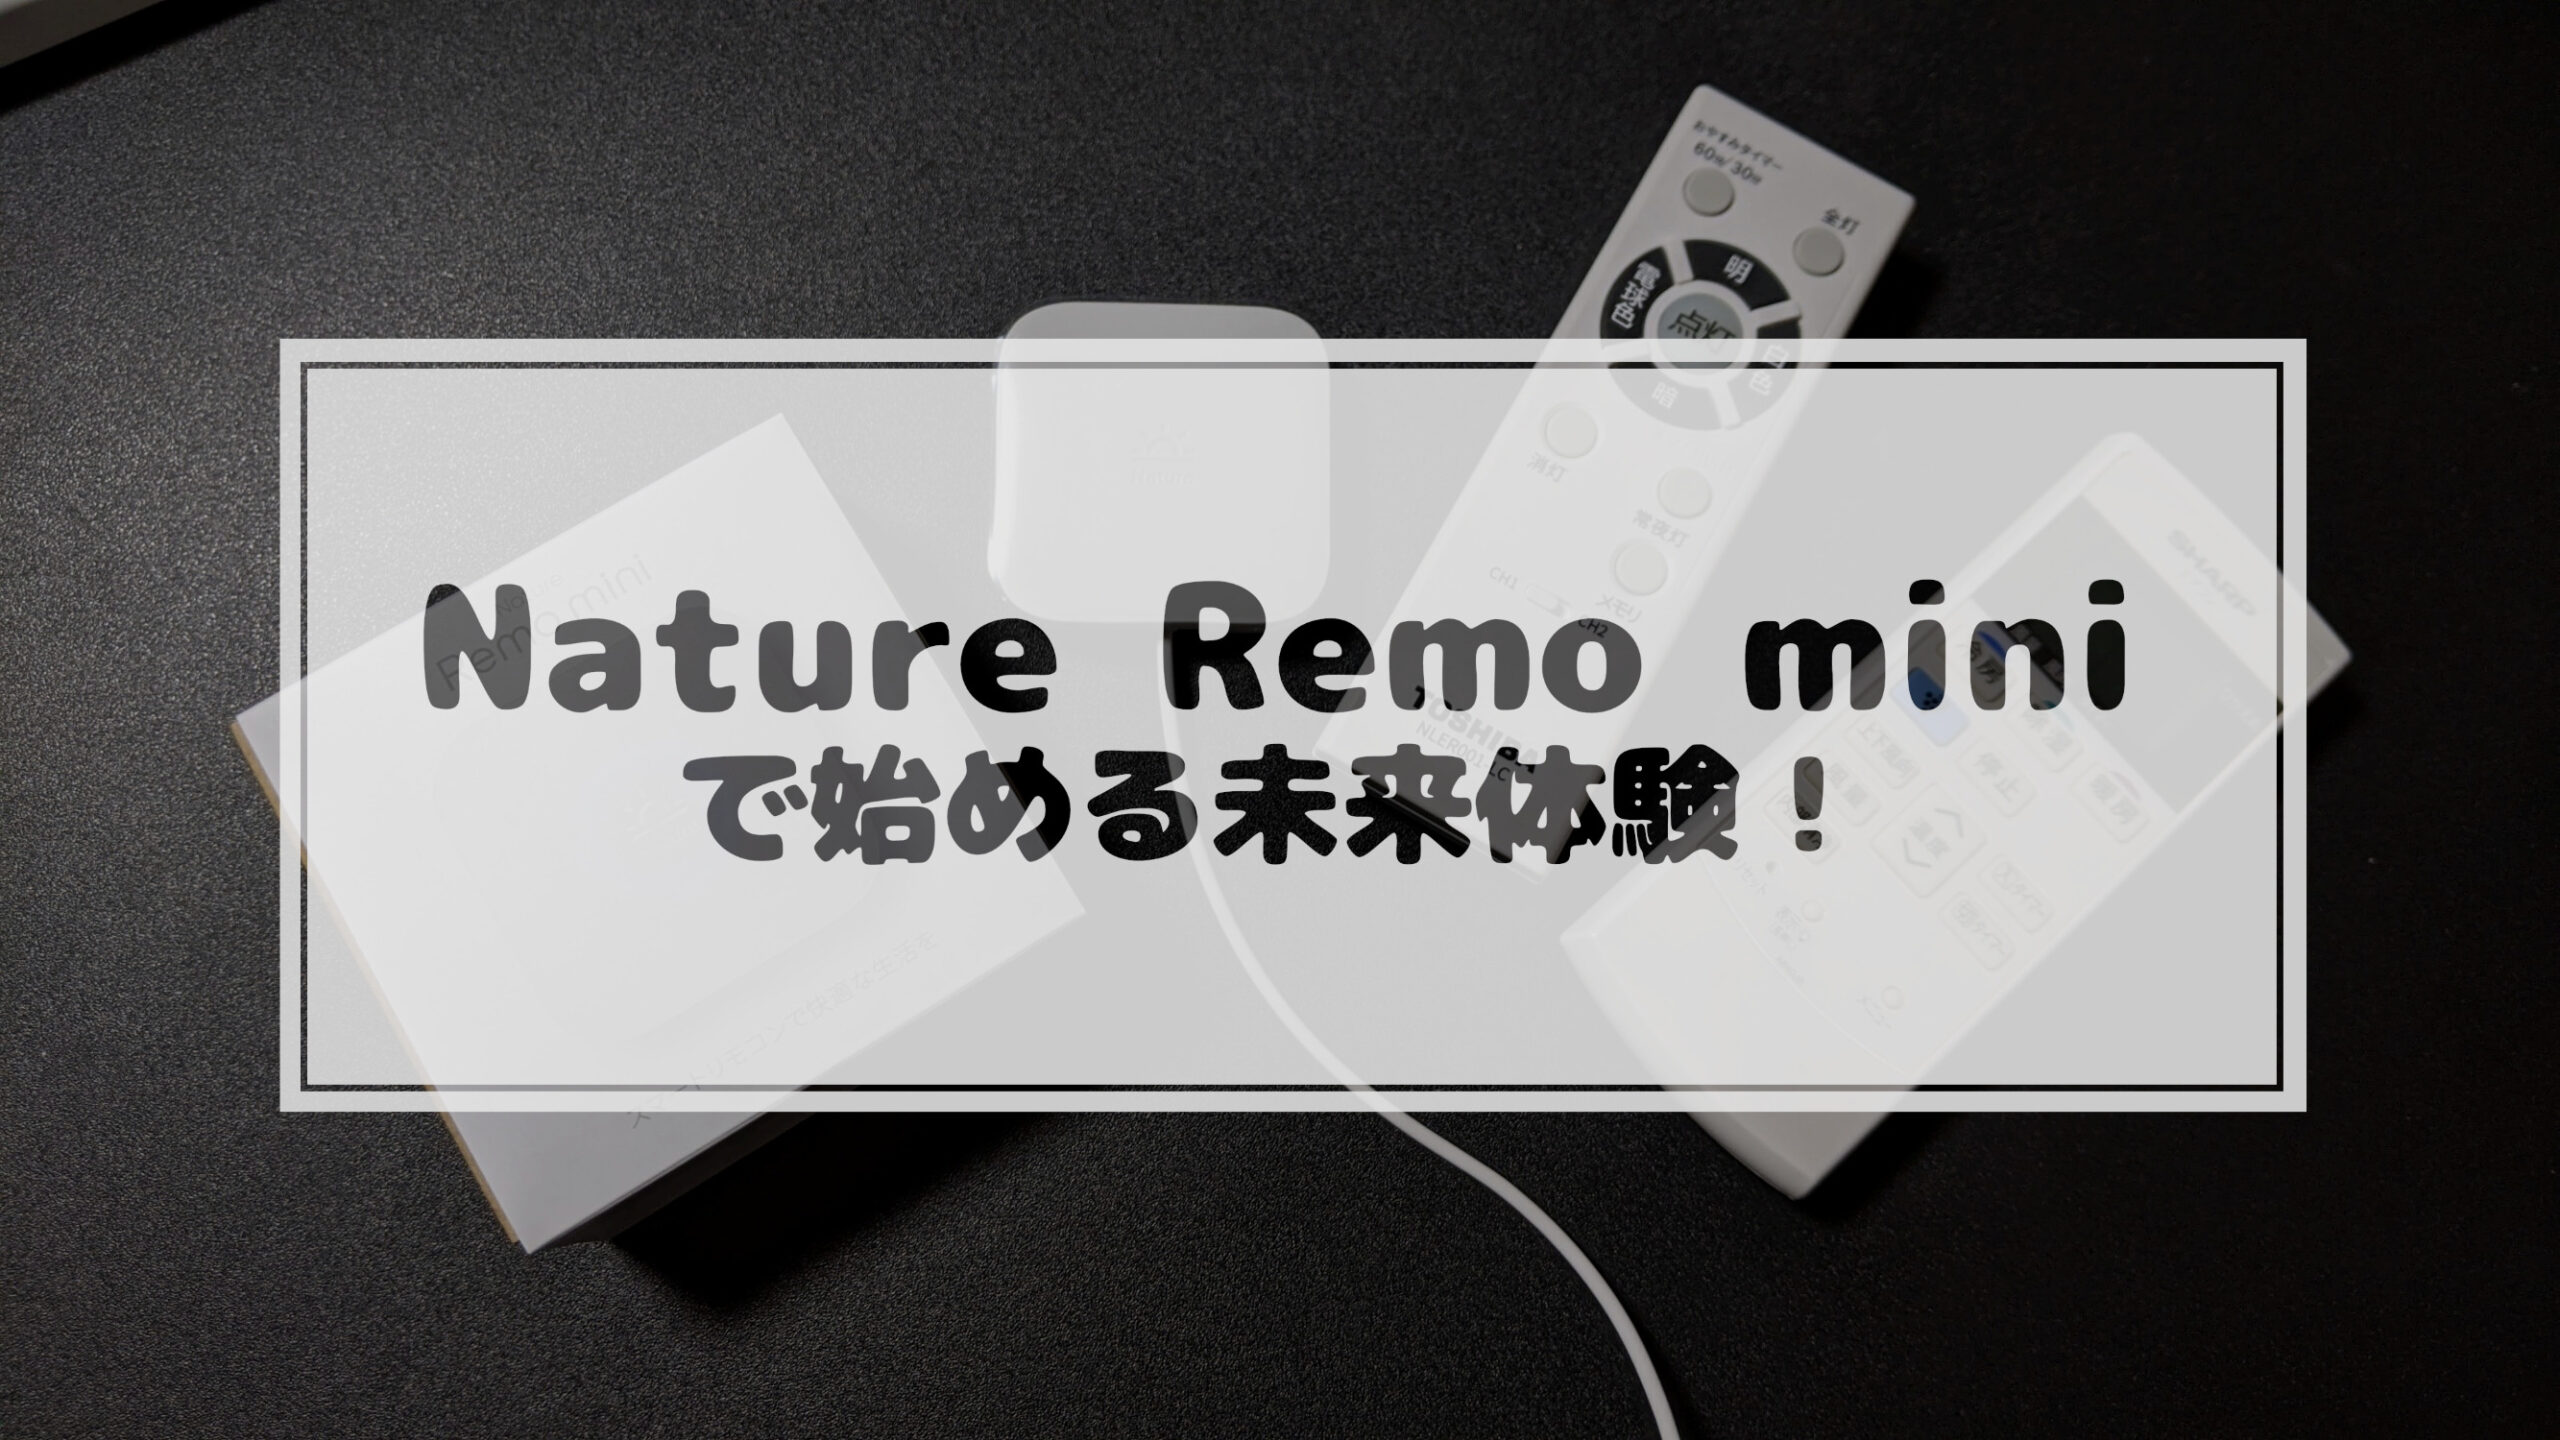 You are currently viewing Nature Remo miniで始める未来体験！